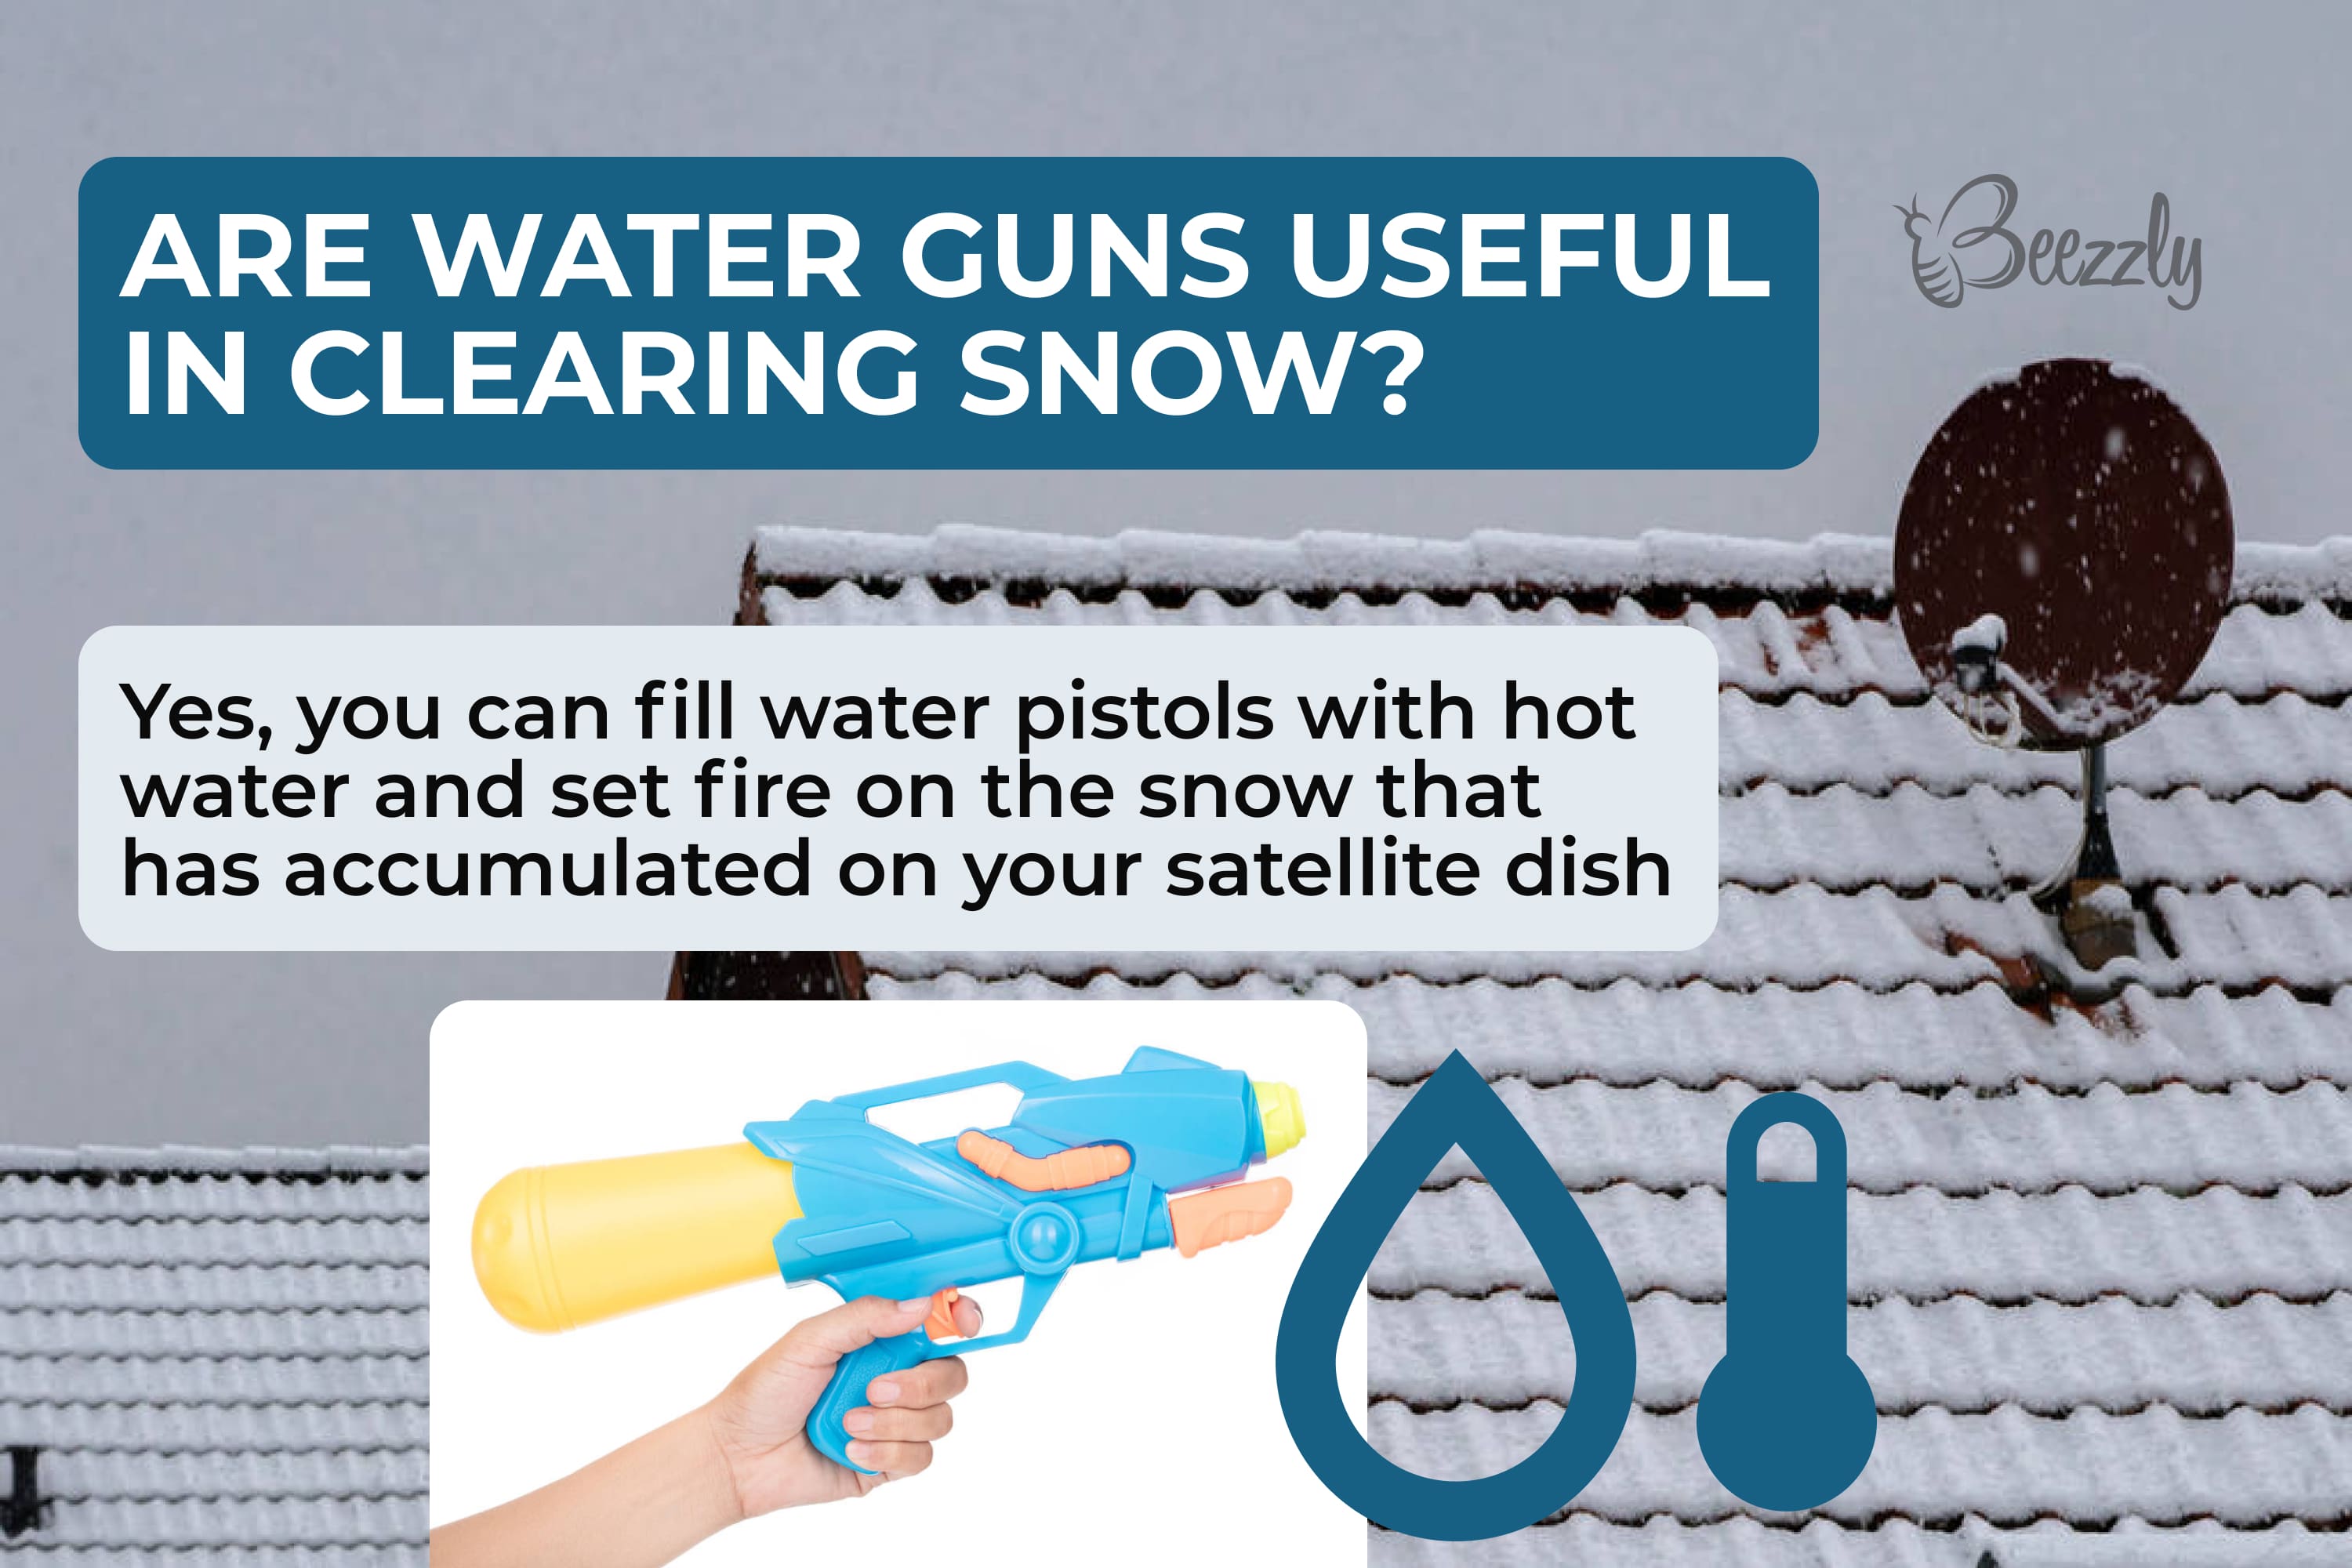 Are water guns useful in clearing snow